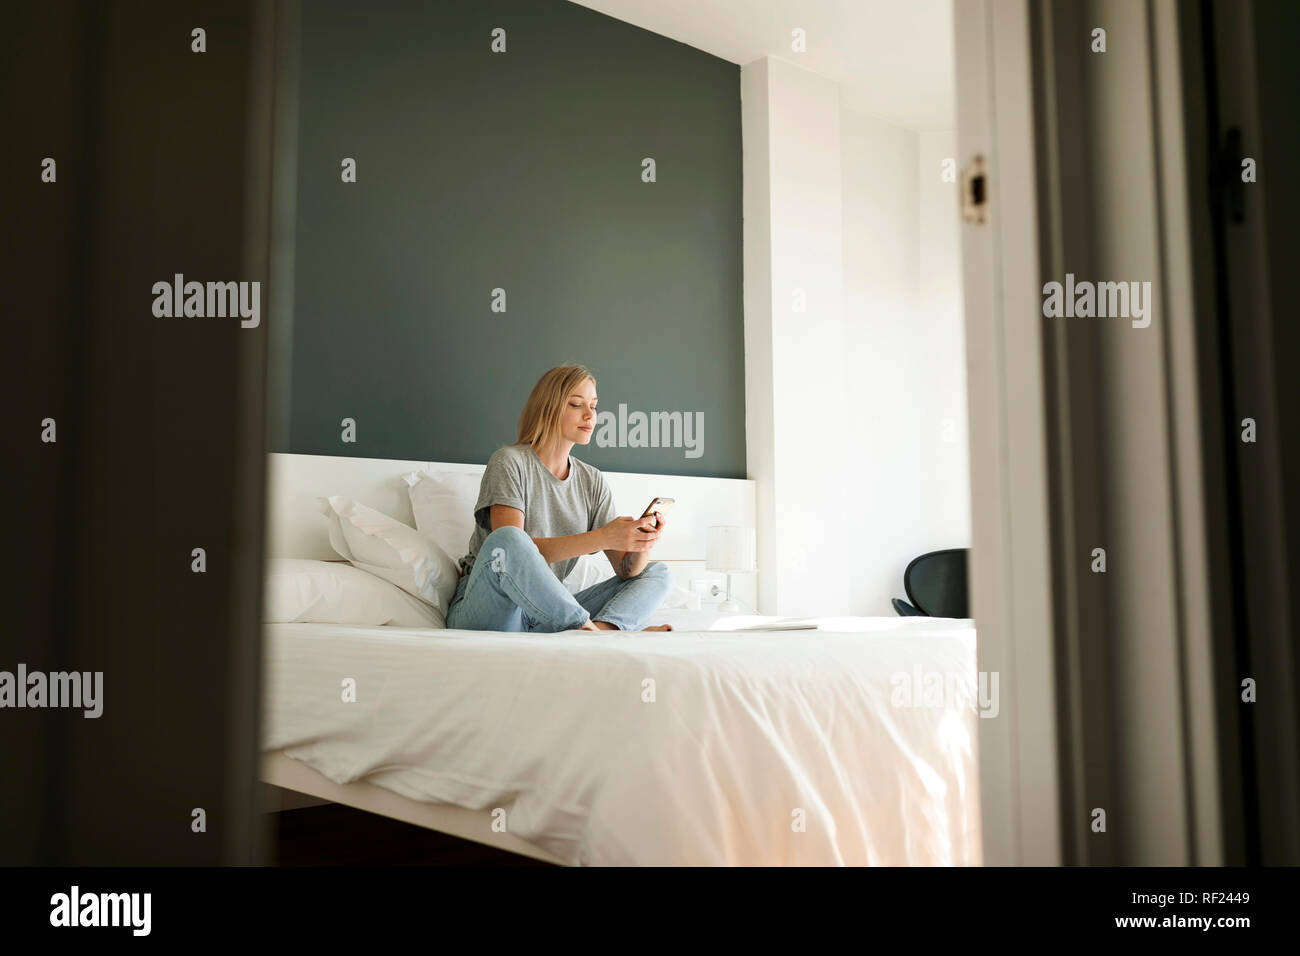 Young woman sitting on bed using cell phone Stock Photo